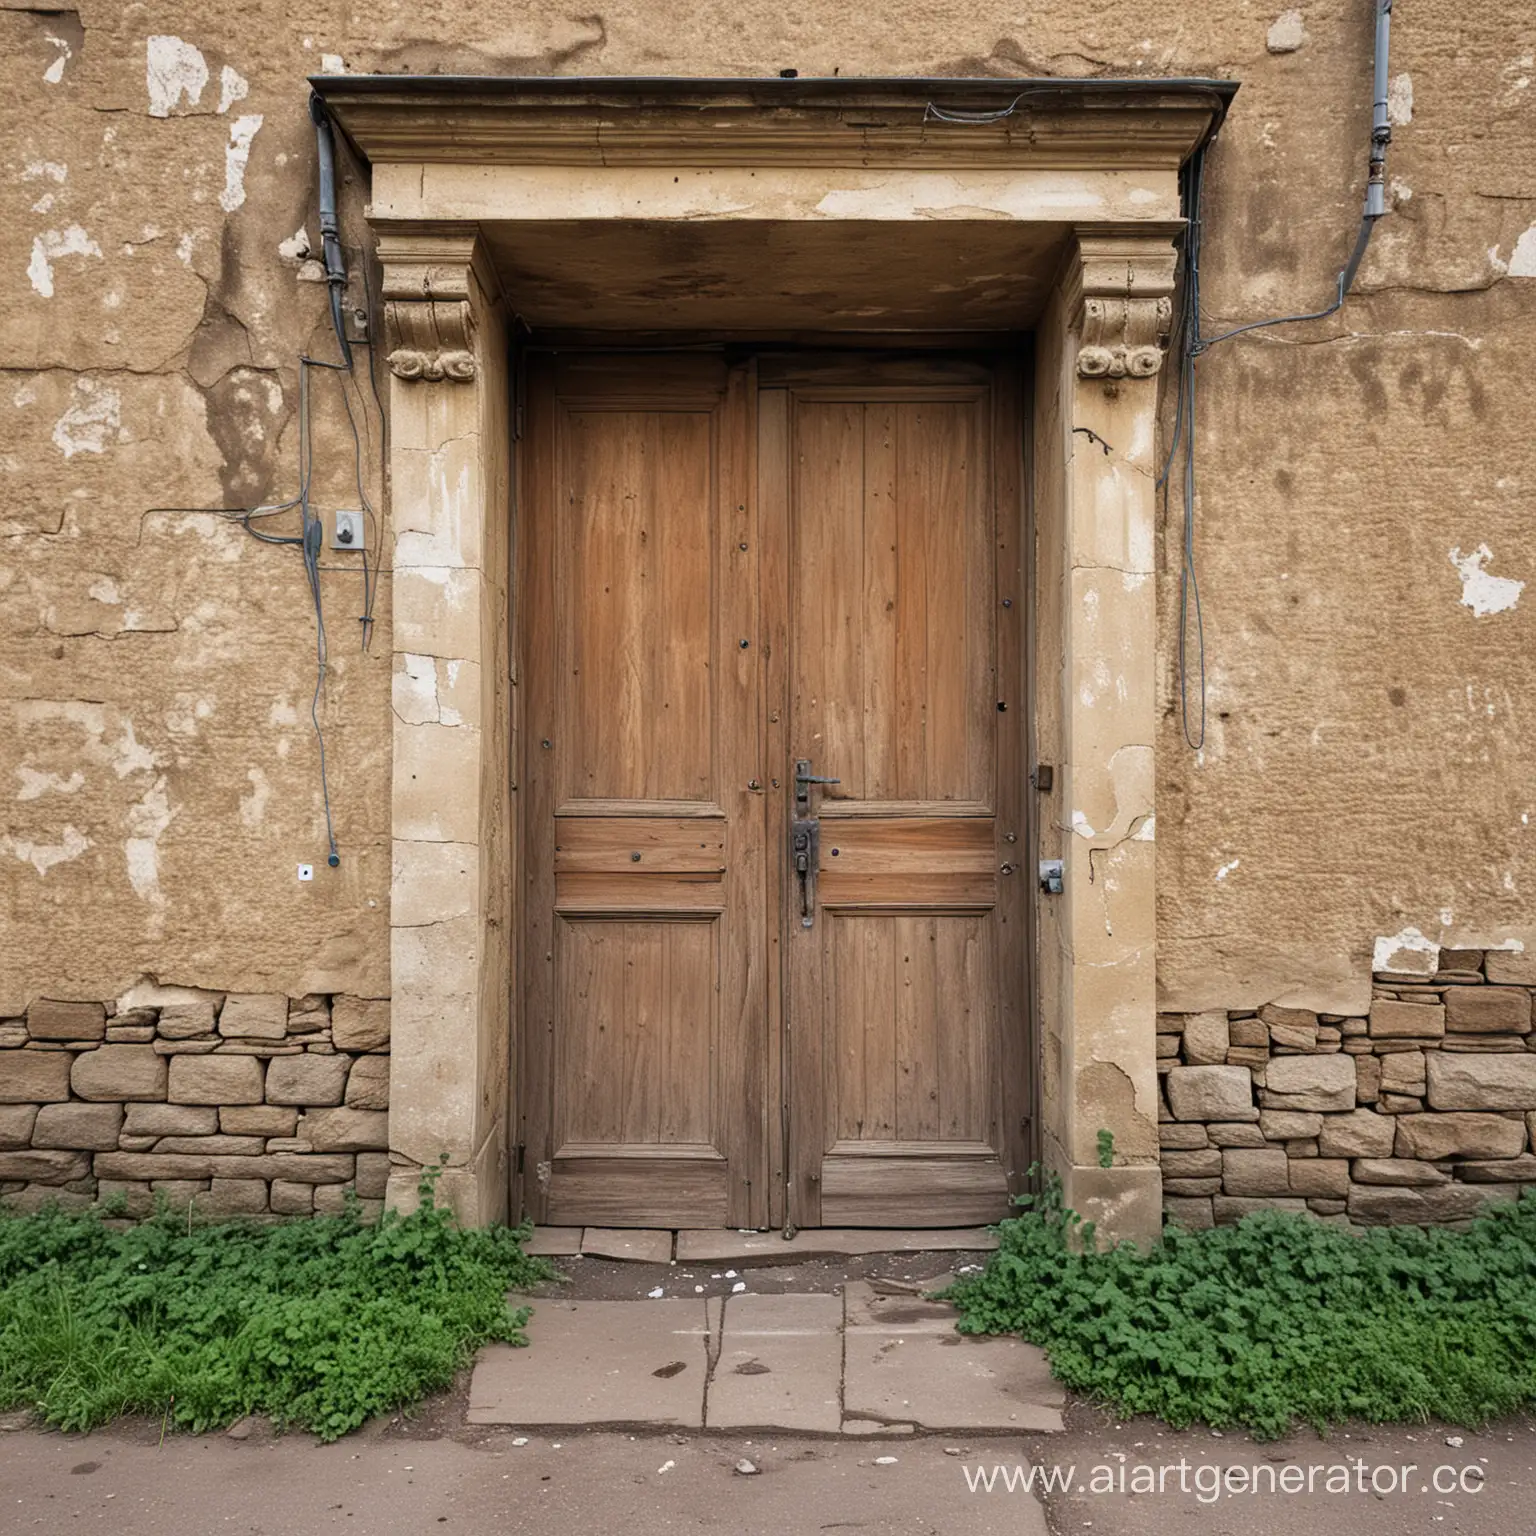 Weathered-and-Dilapidated-Entranceway